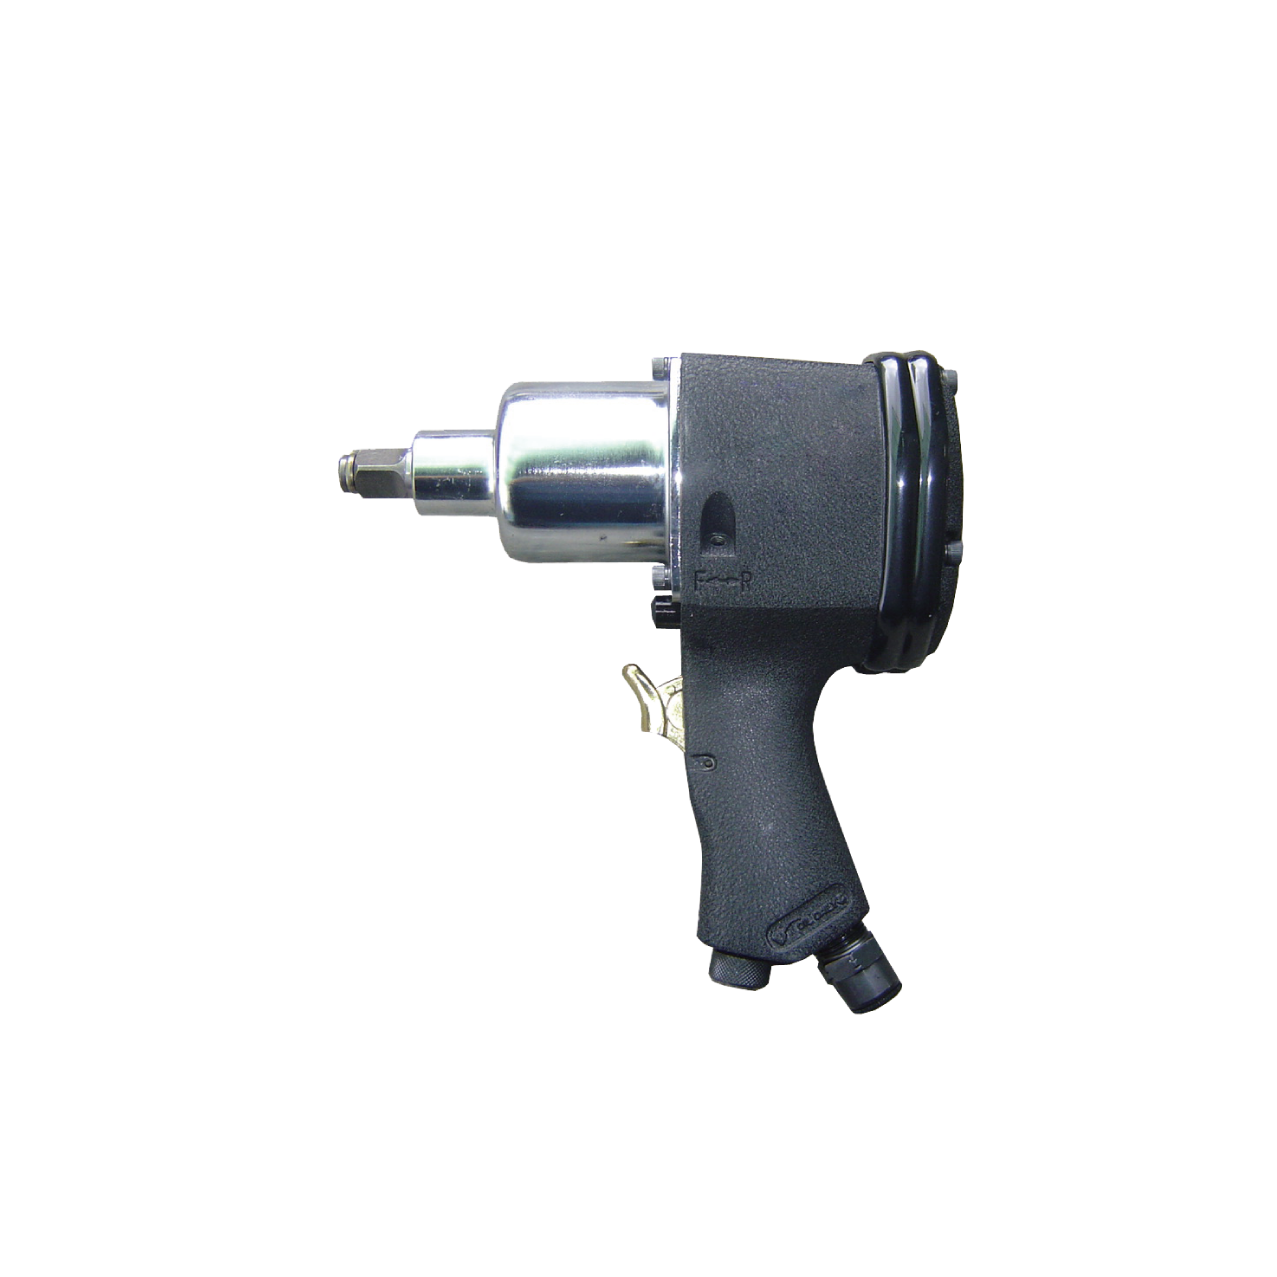 1/2" Dr. Air Impact Wrench- Pin Clutch